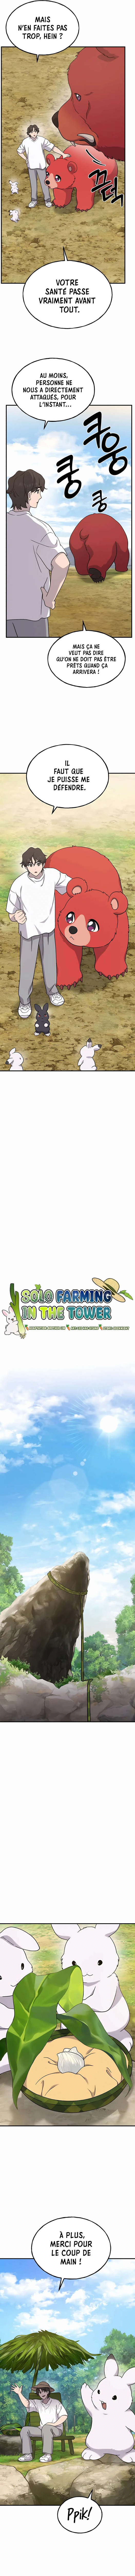 Solo Farming In The Towerimage2